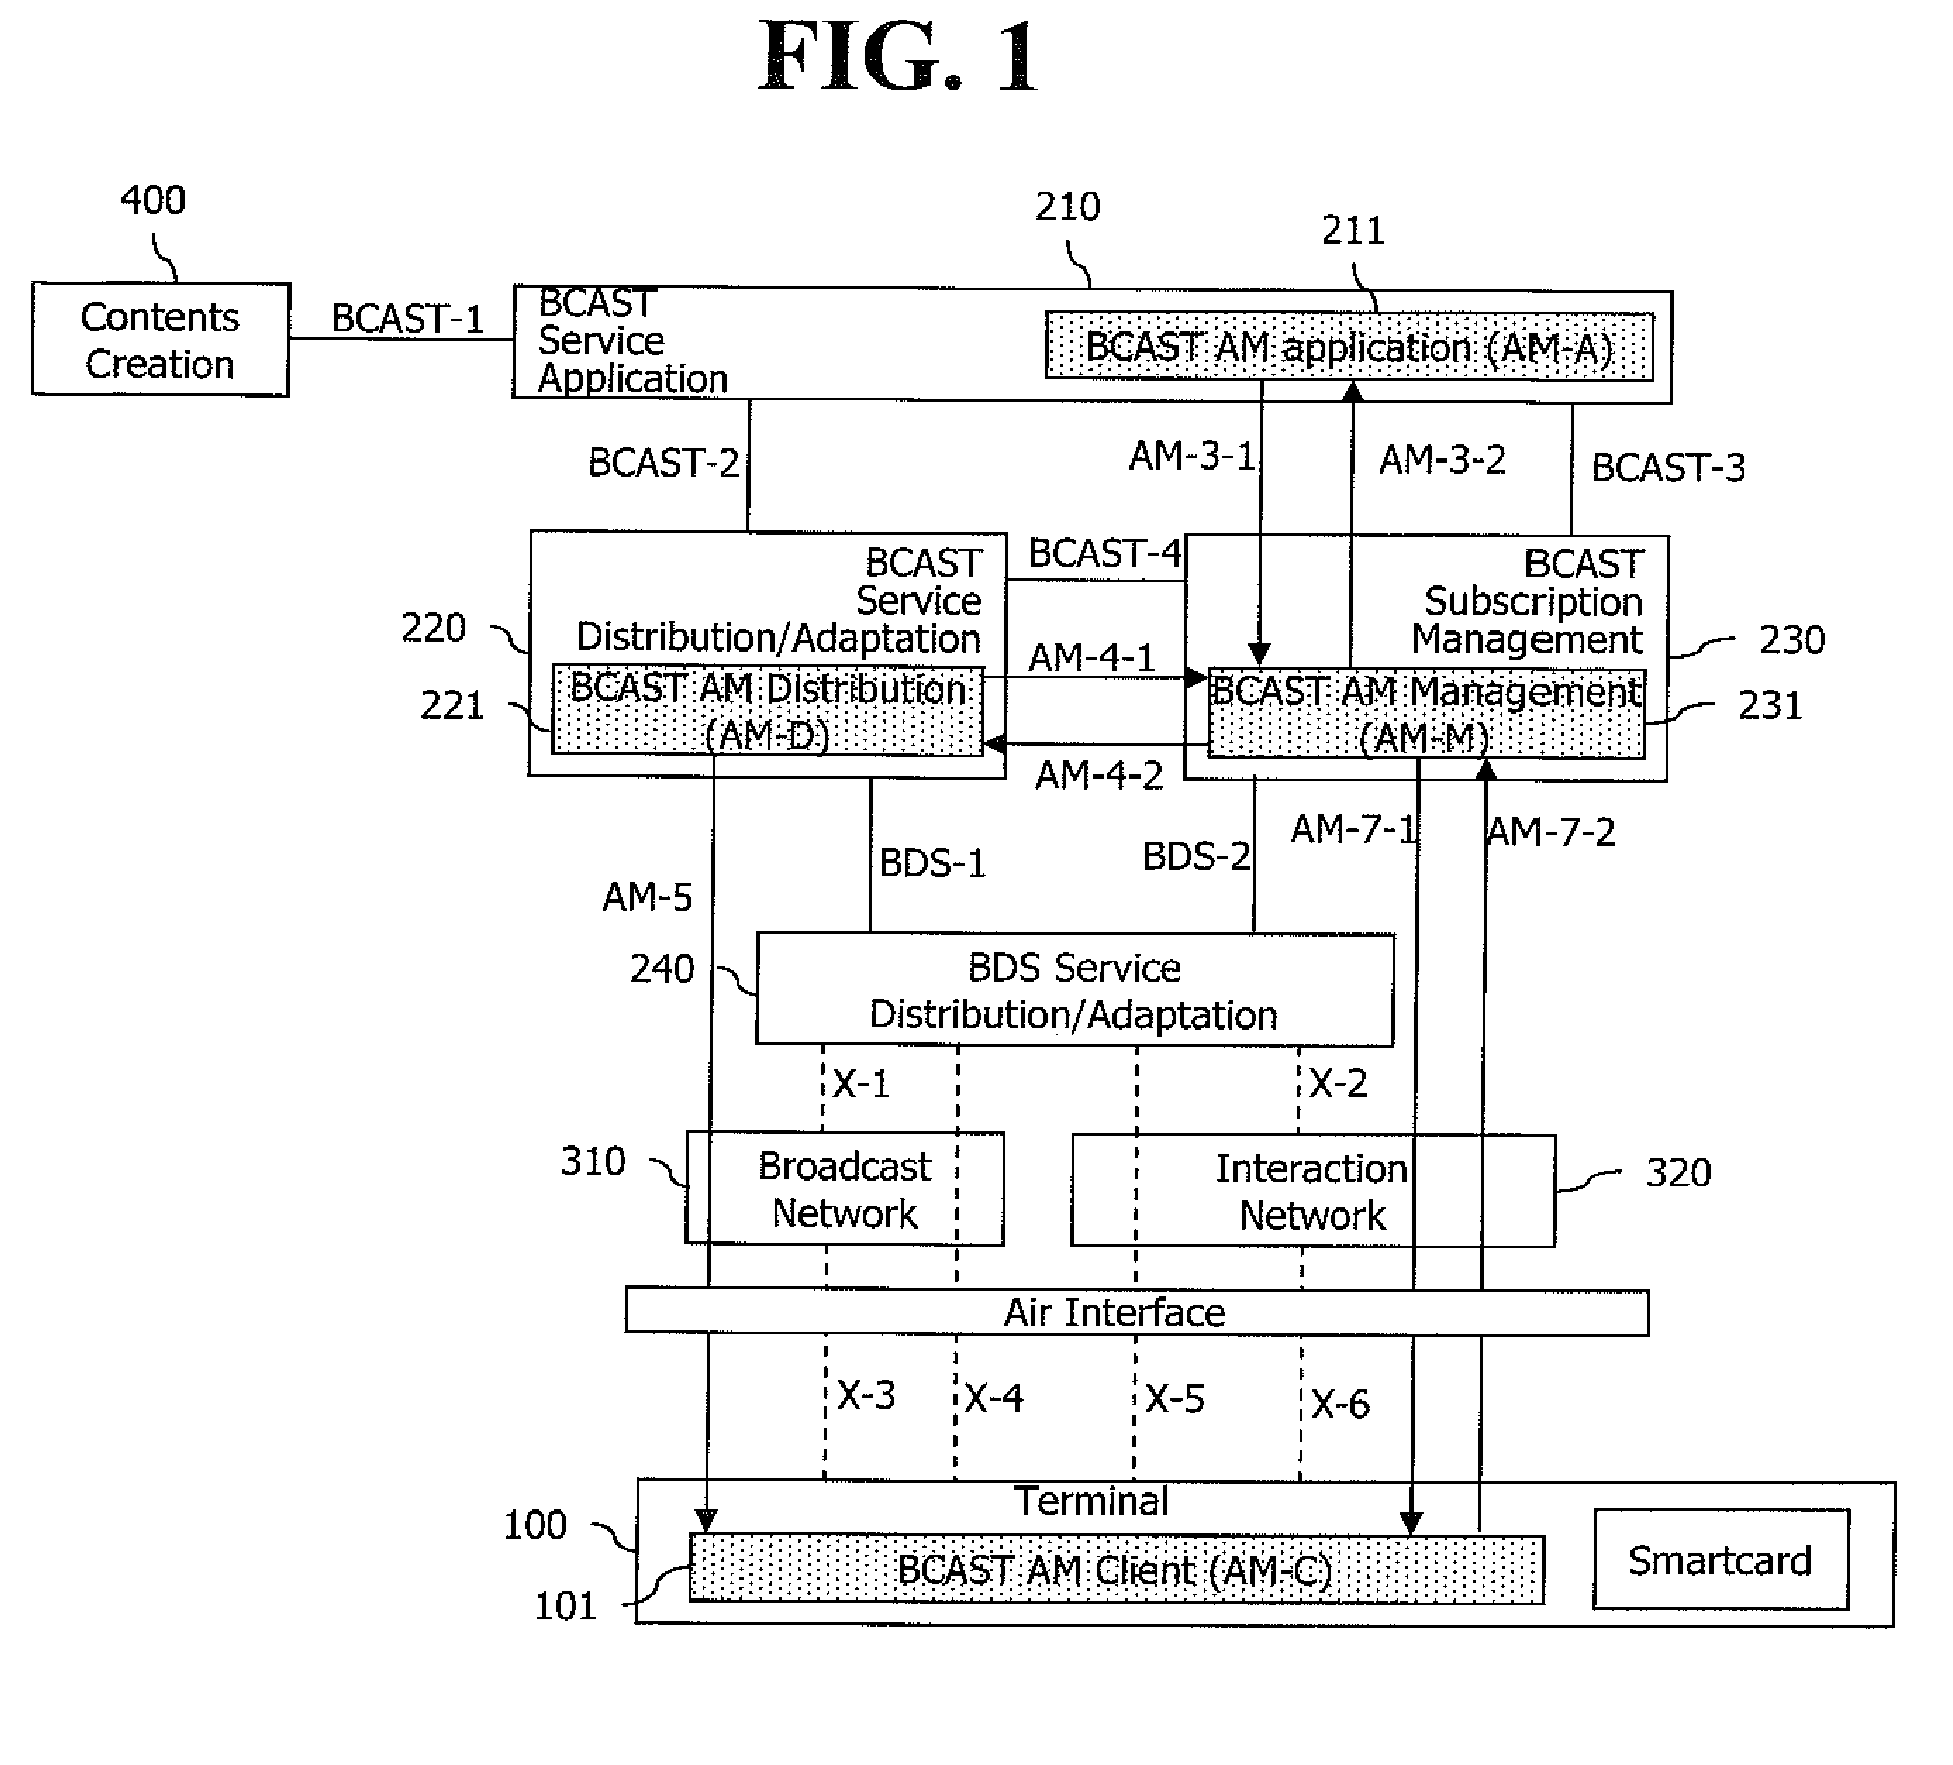 Method for measuring audience to broadcast service and content at terminal